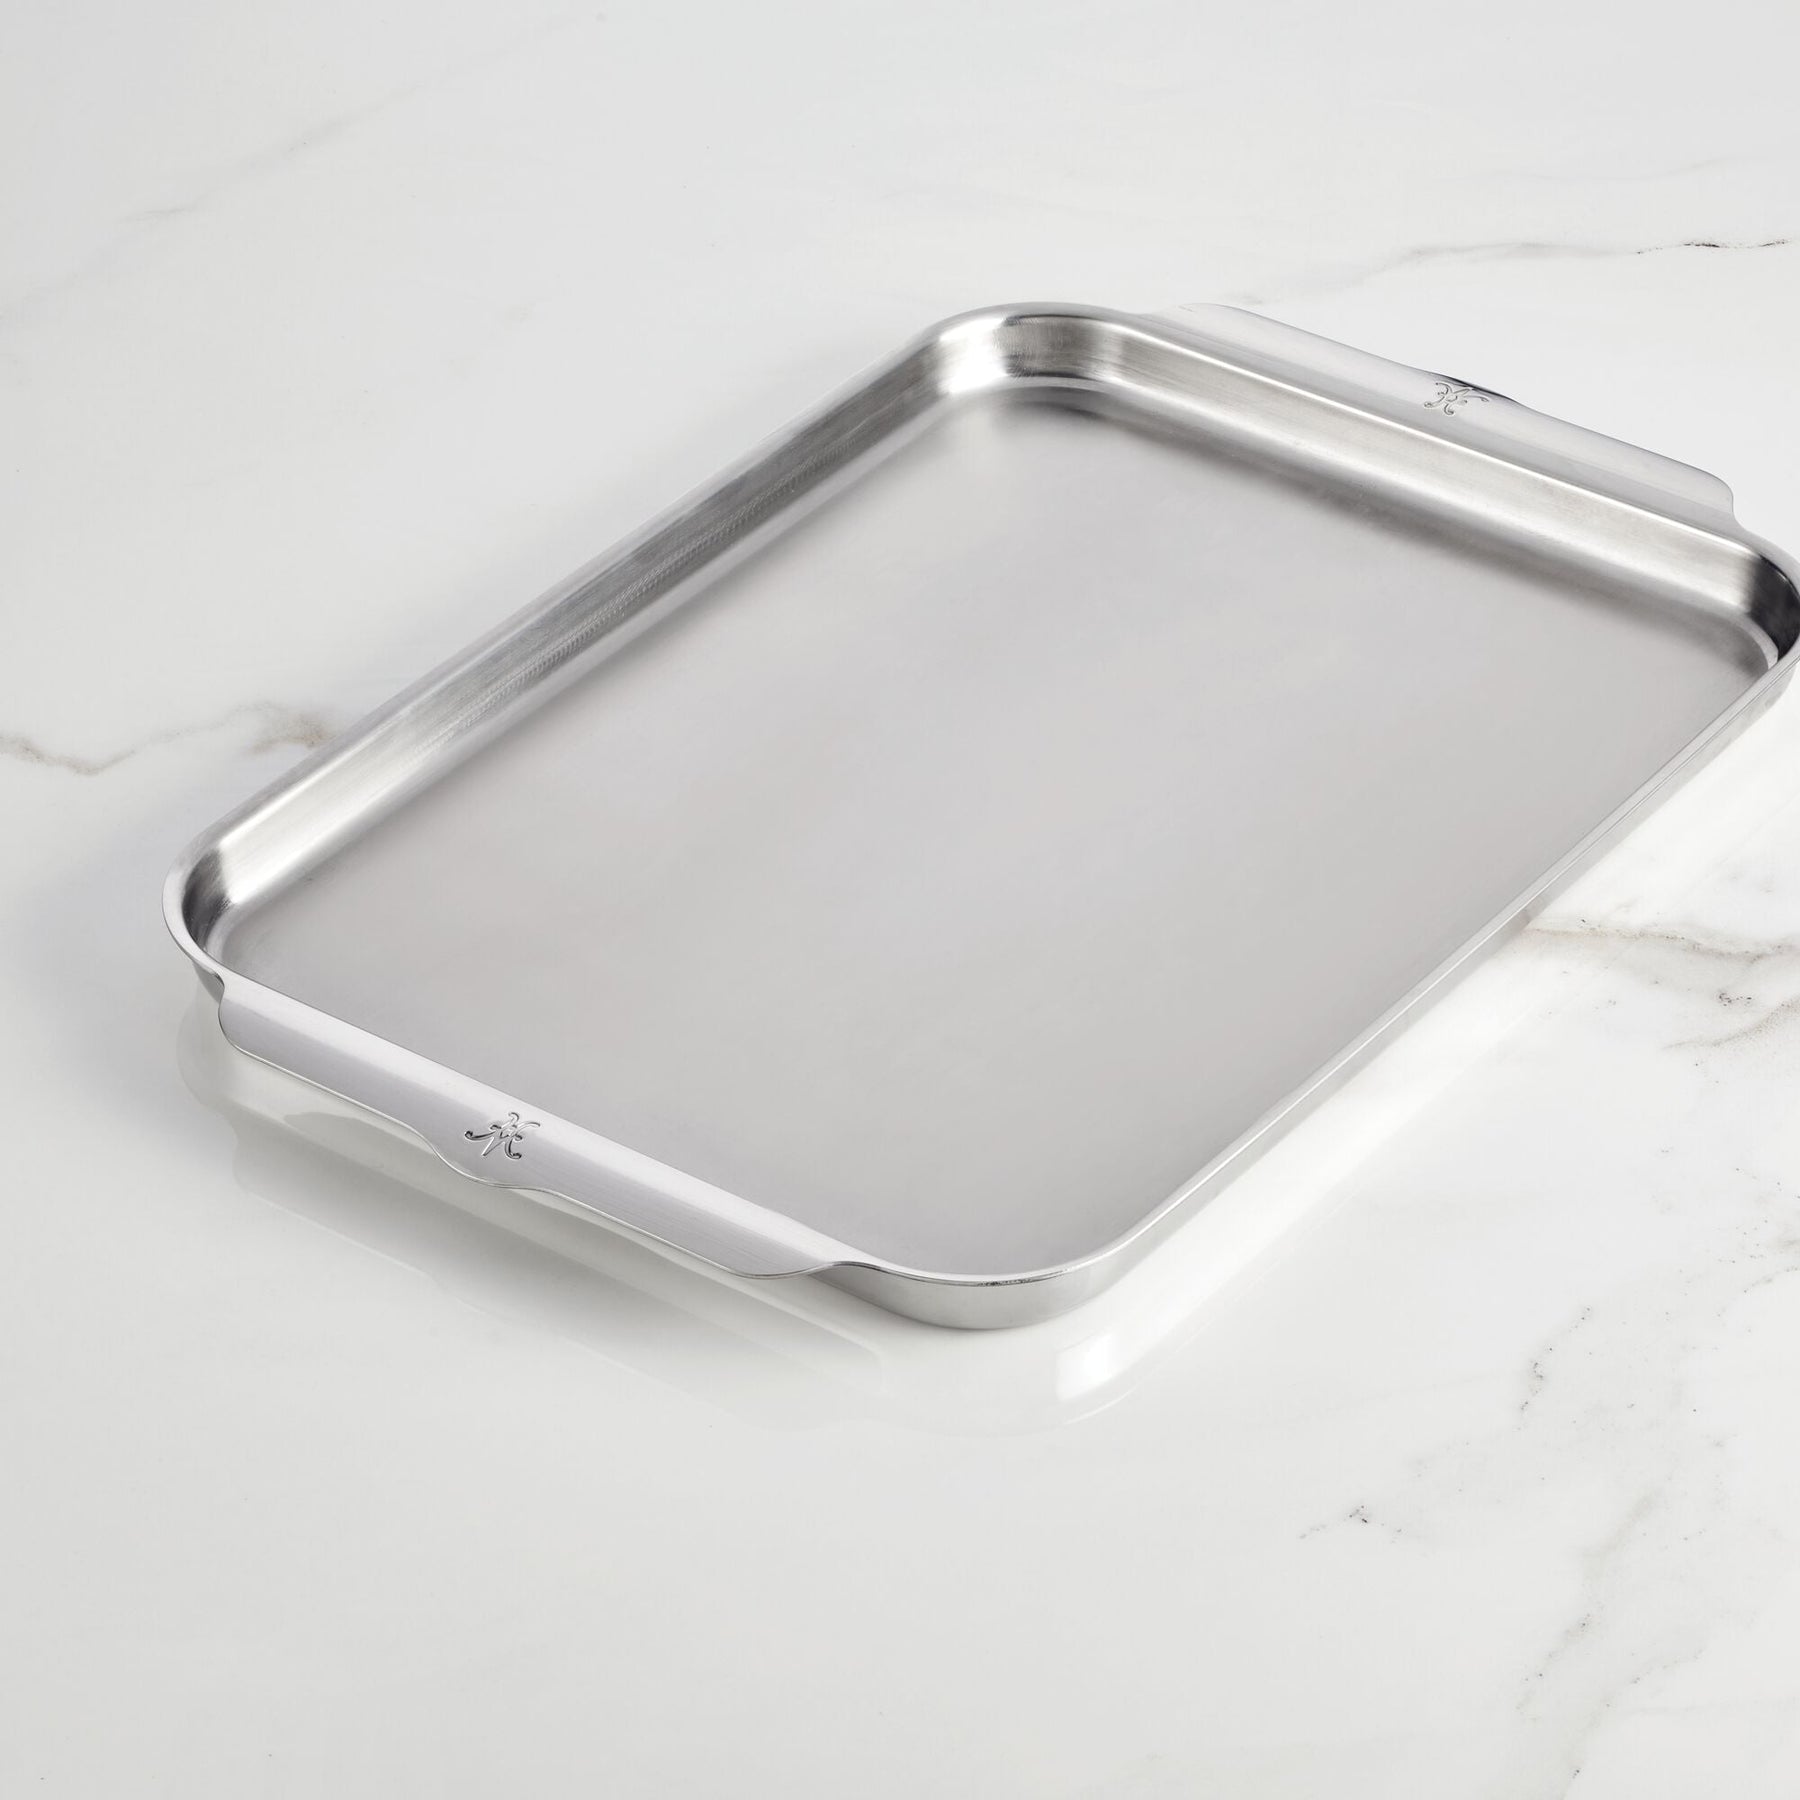 12 x 10-inch BAKING and COOKIE SHEET with Stainless-Steel RACK